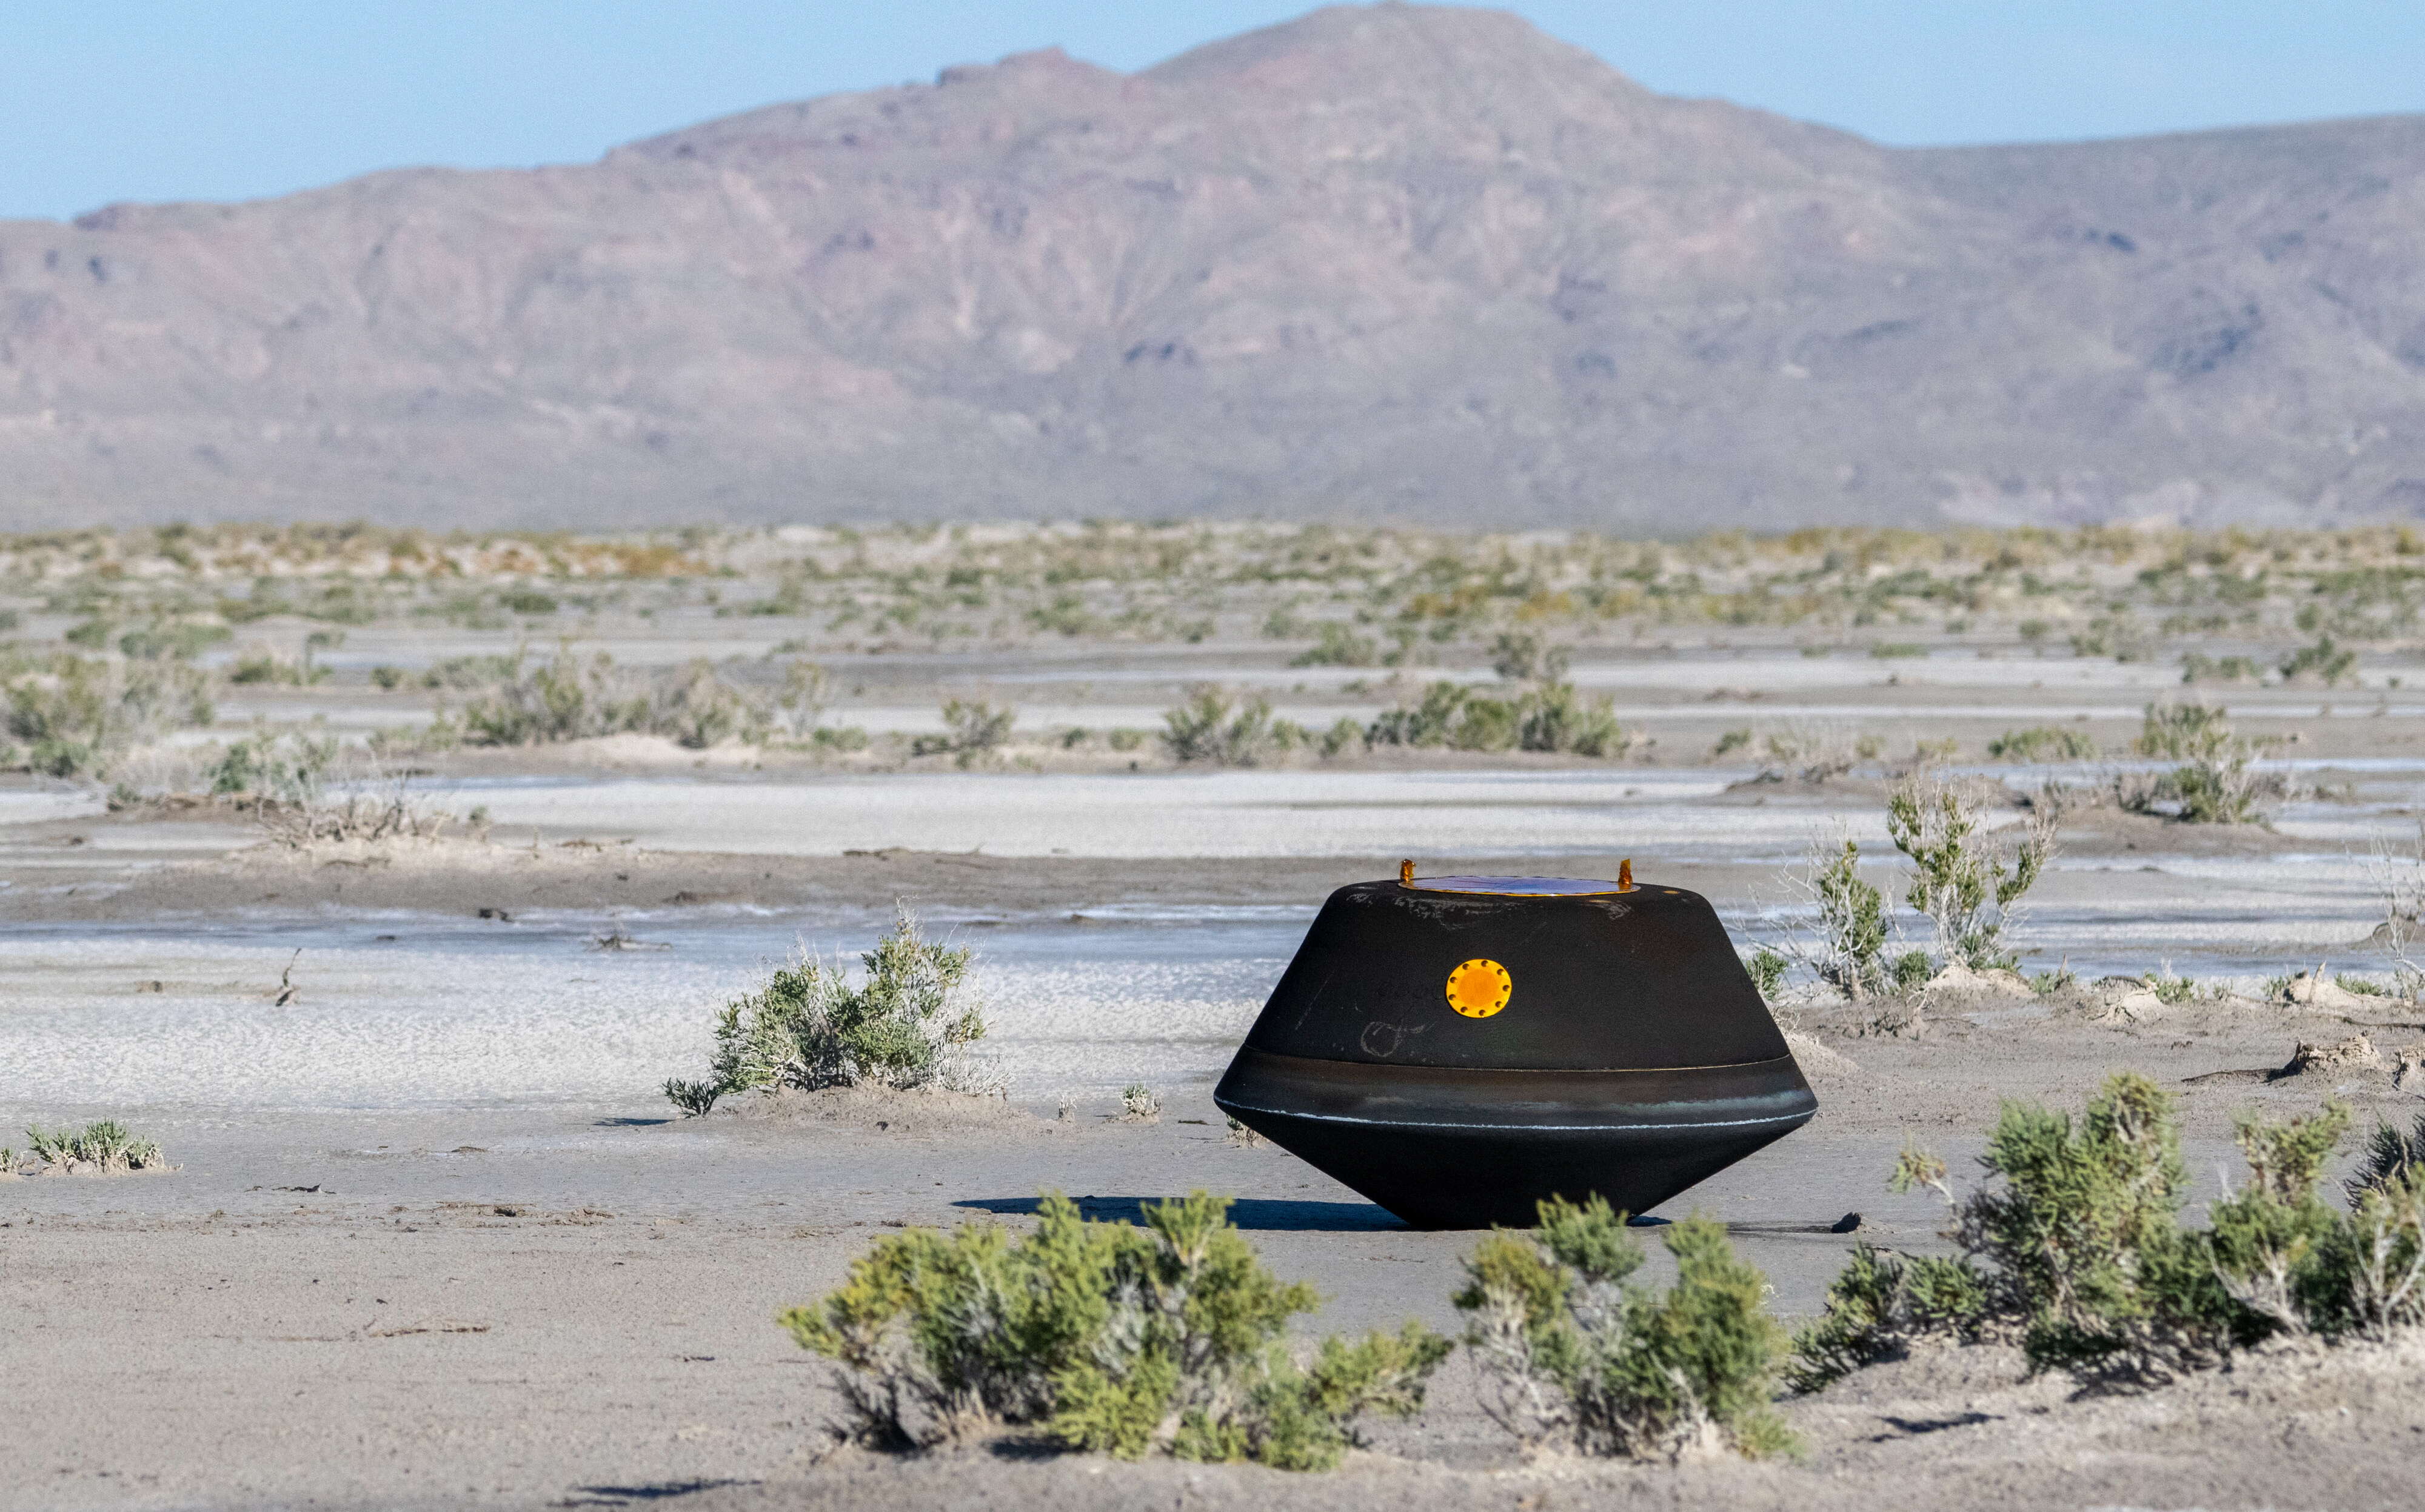 space capsule in desert with scrub around it